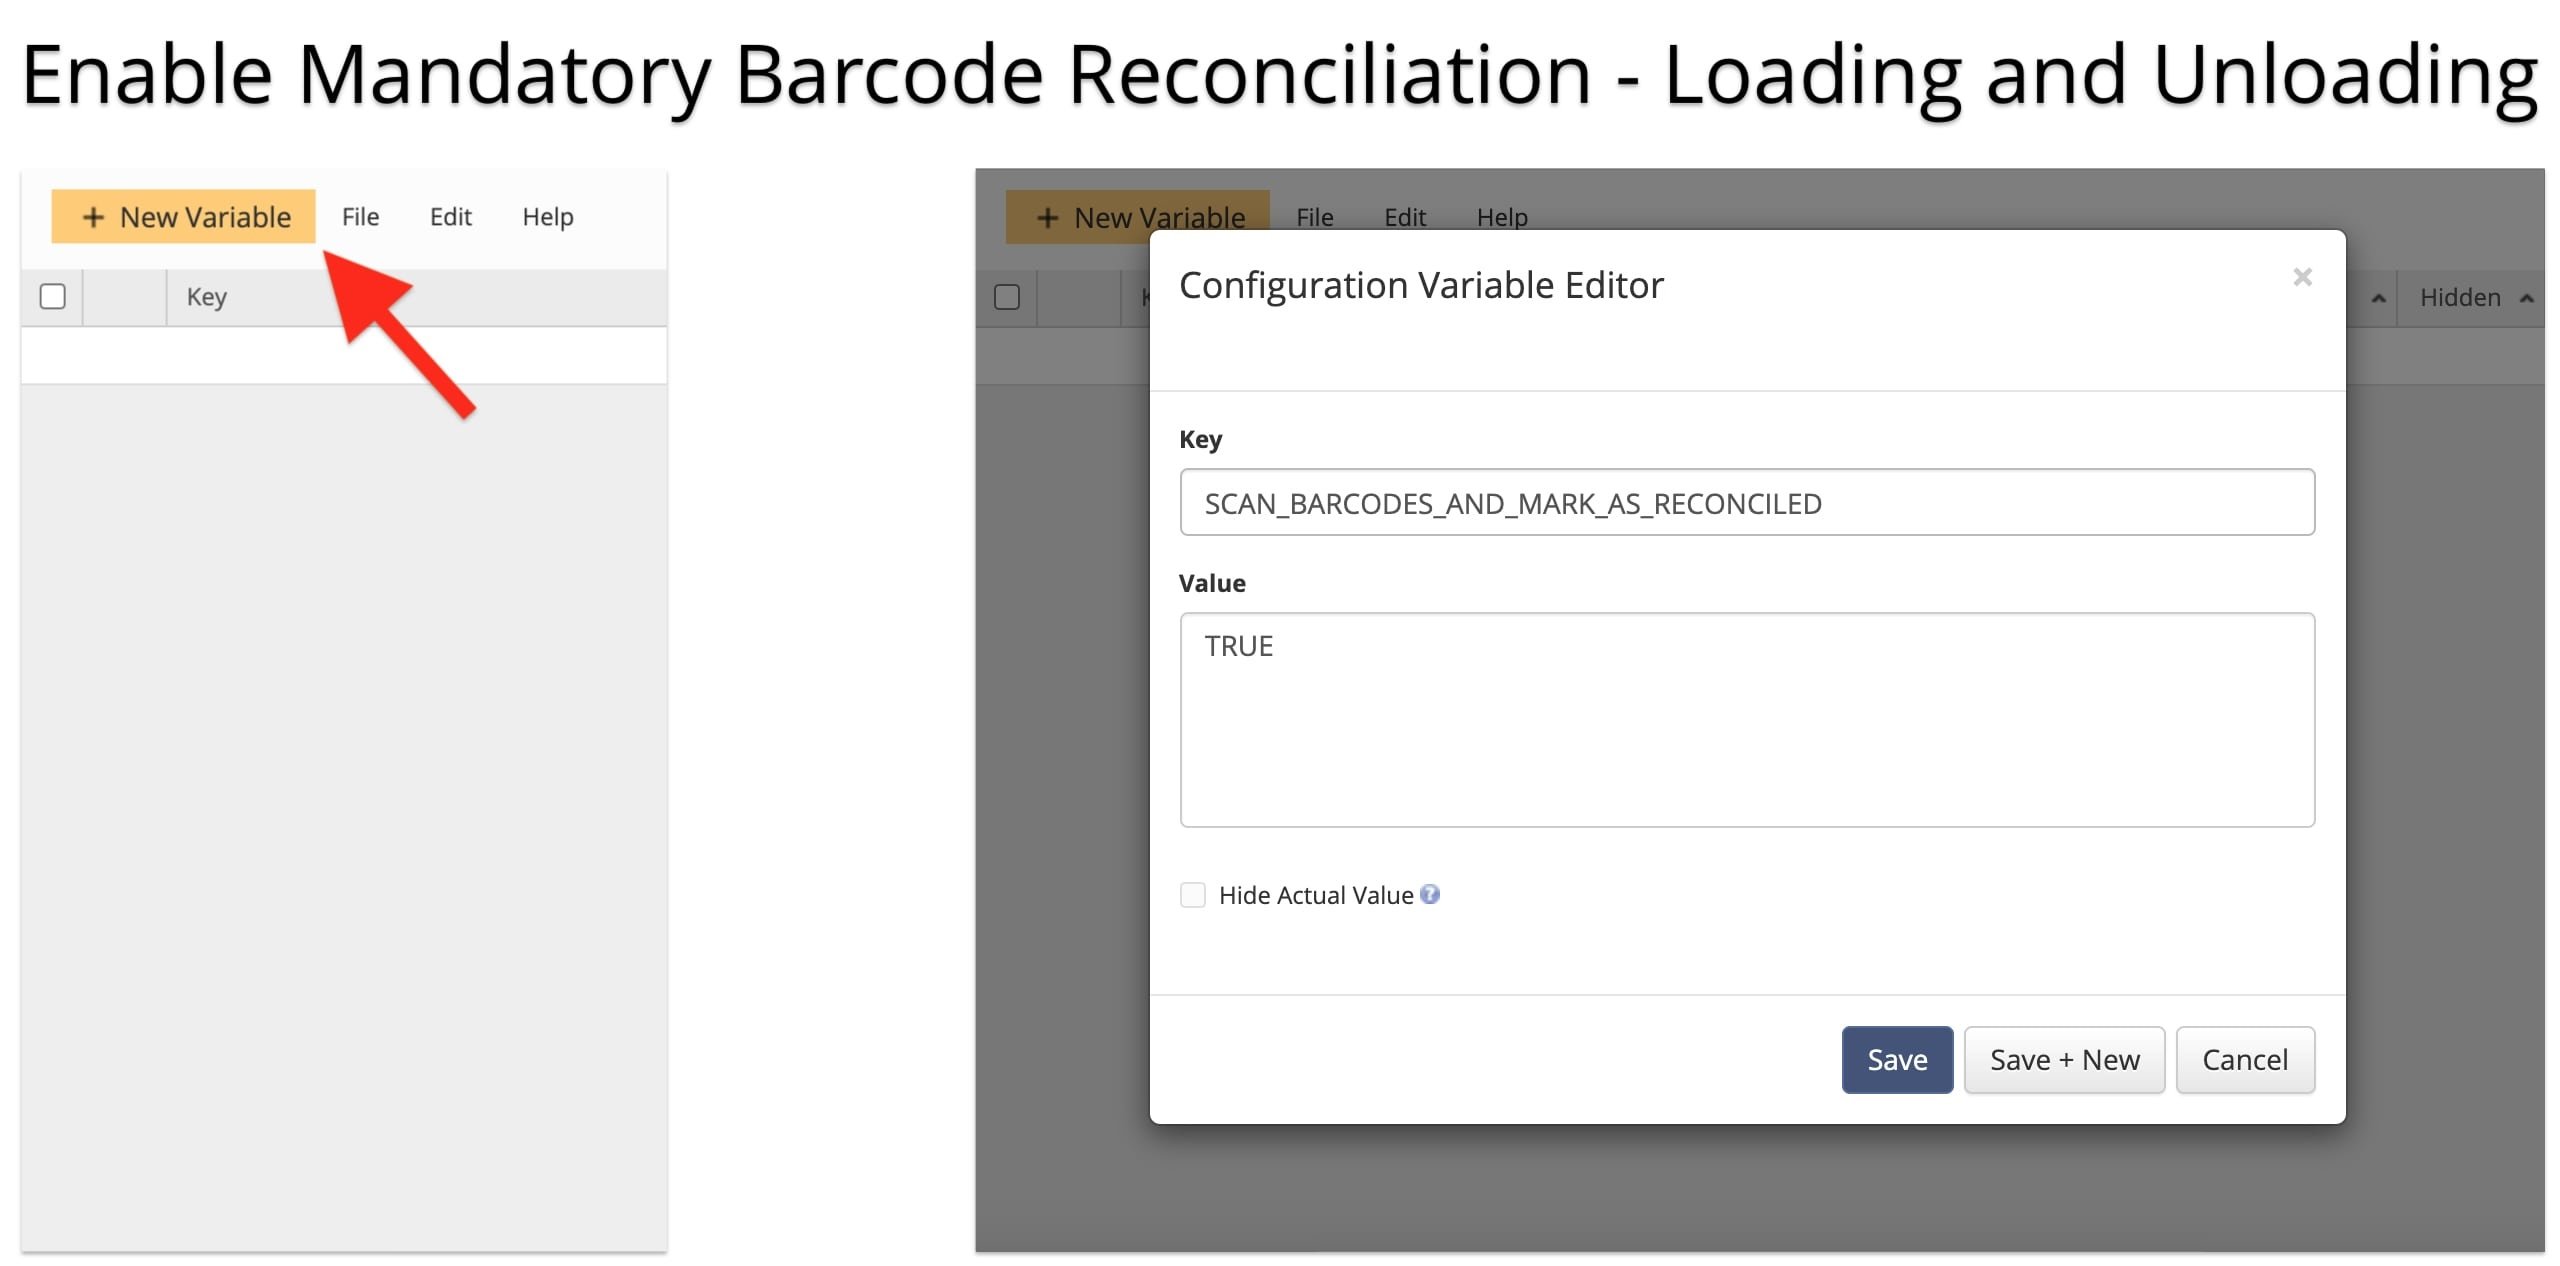 Enable mandatory barcode reconciliation for loading and unloading on mobile route planner apps.